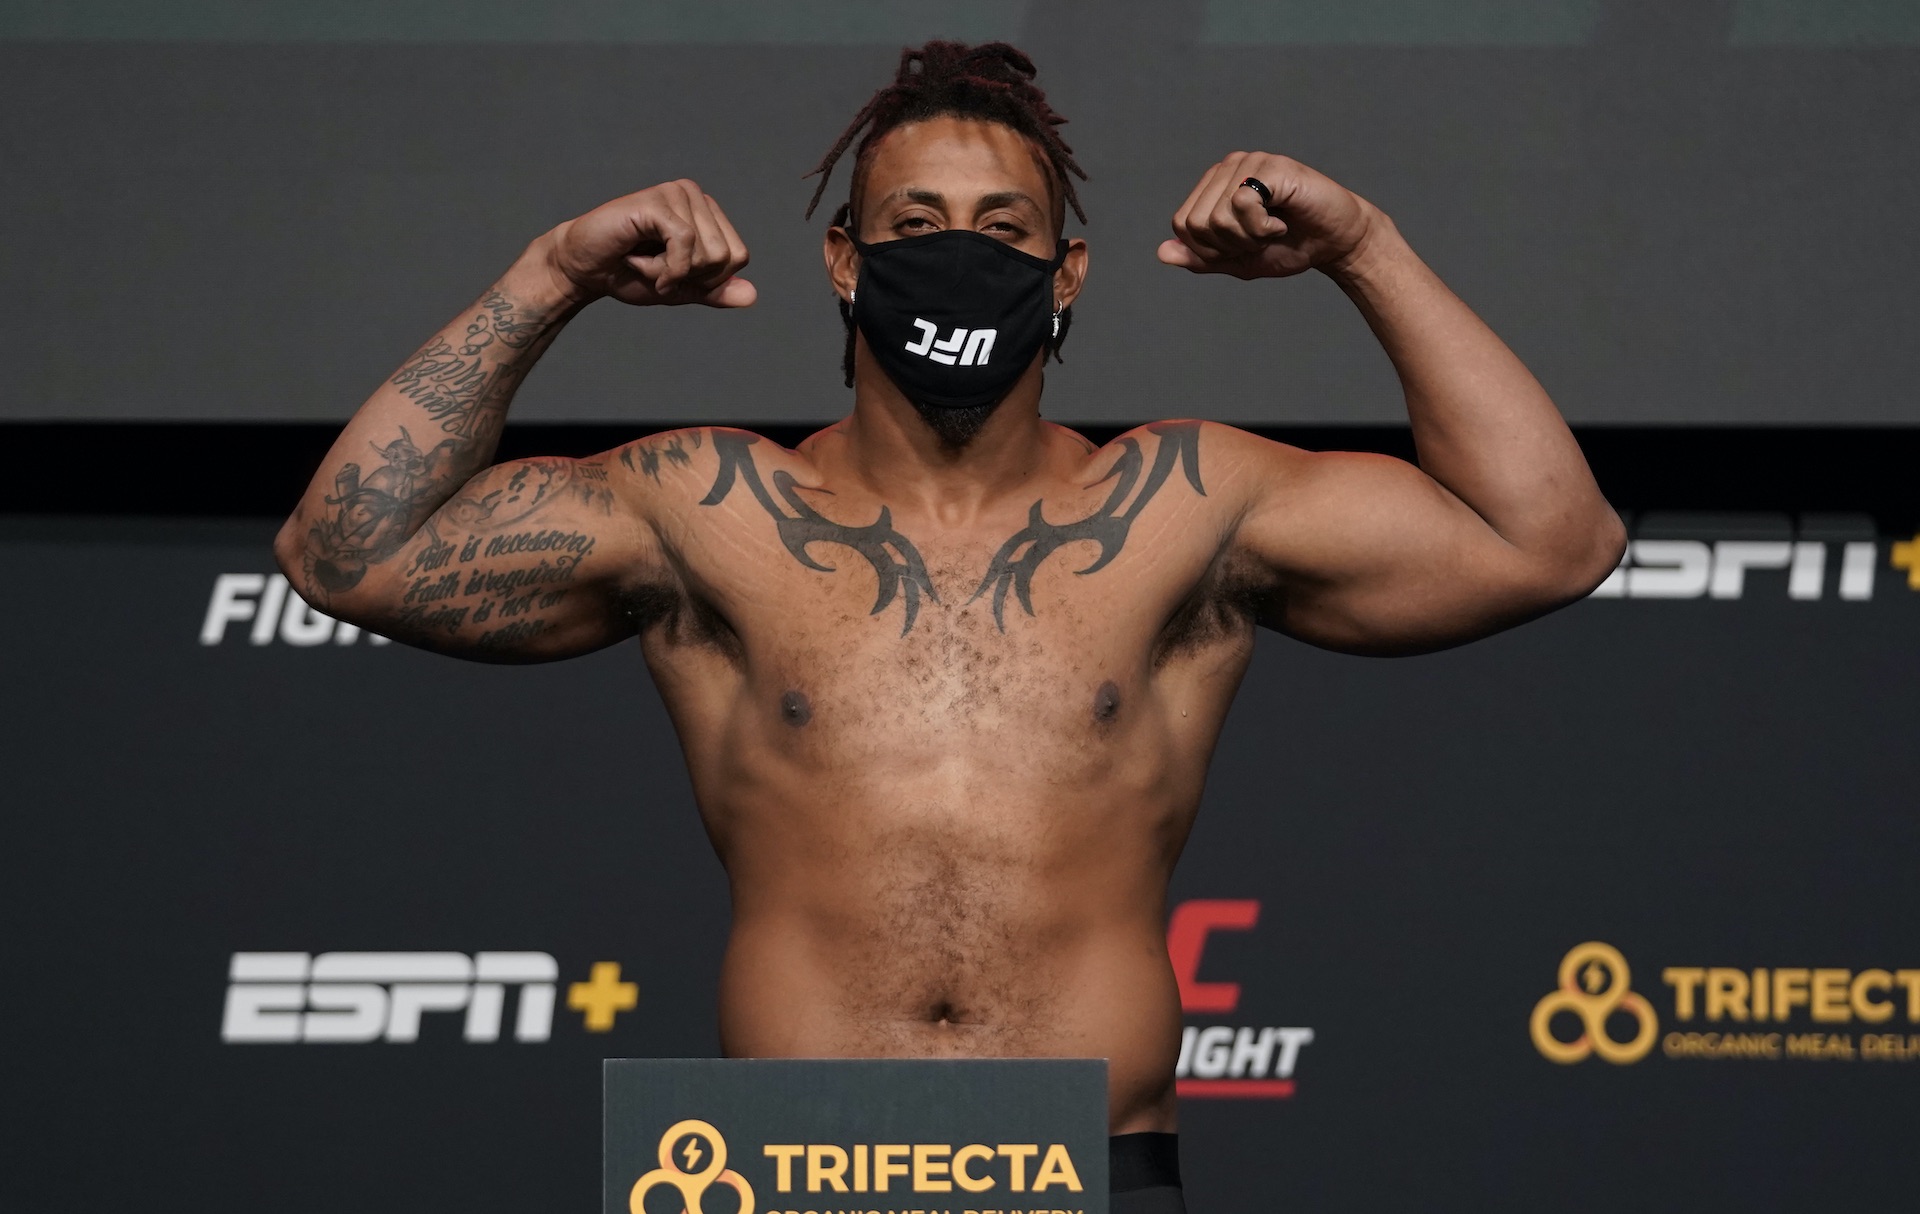 Everything You Need to Know About Greg Hardy Before UFC 264 - The